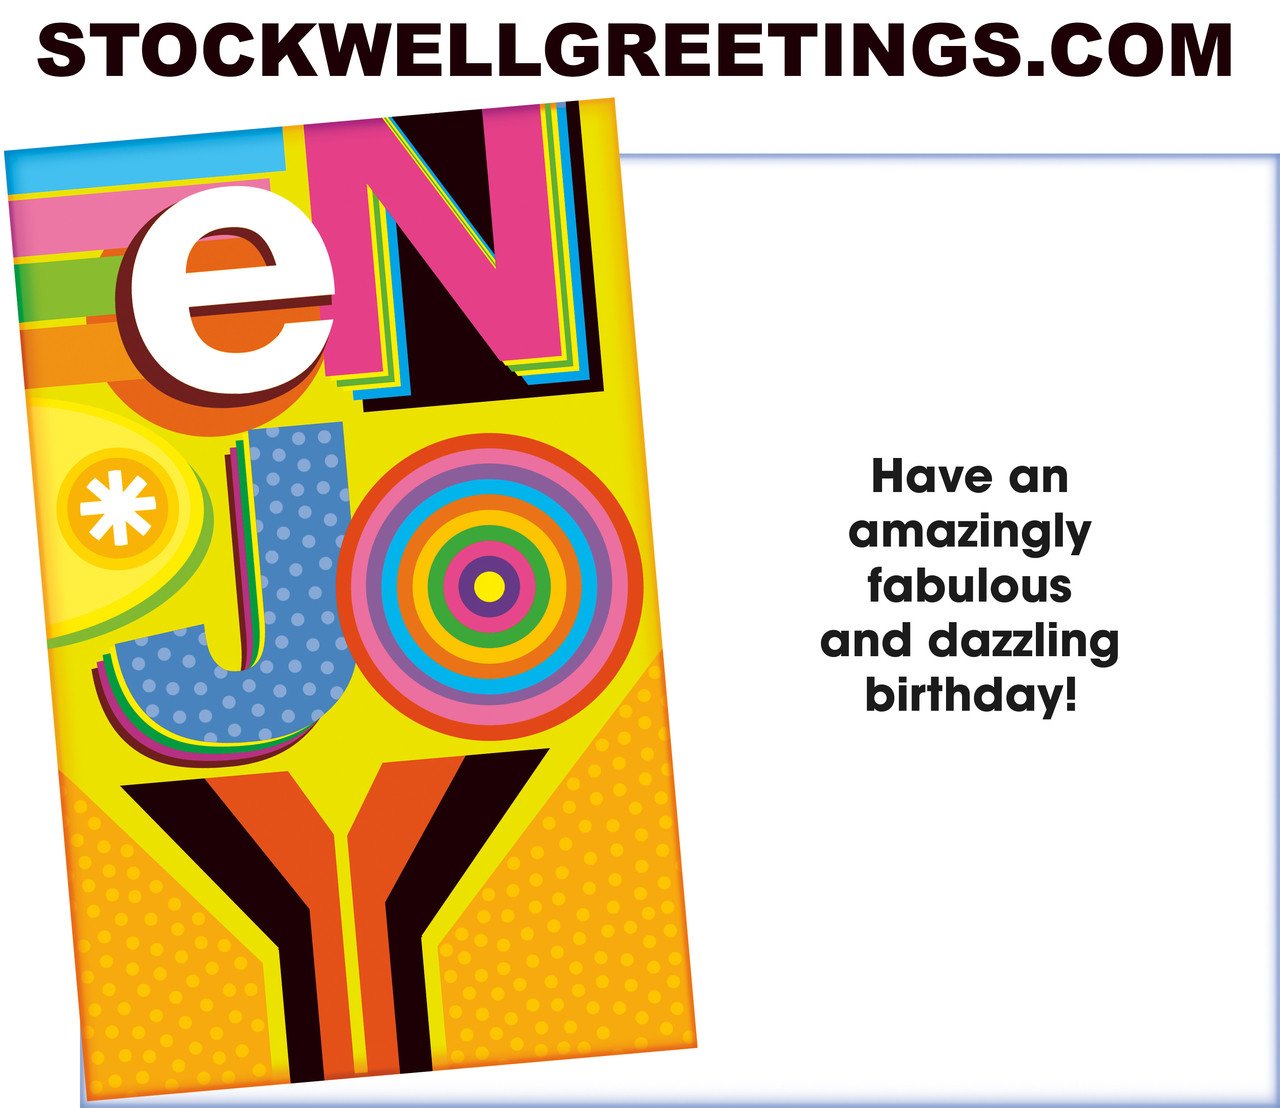 discount greeting cards images - Stockwell Greetings